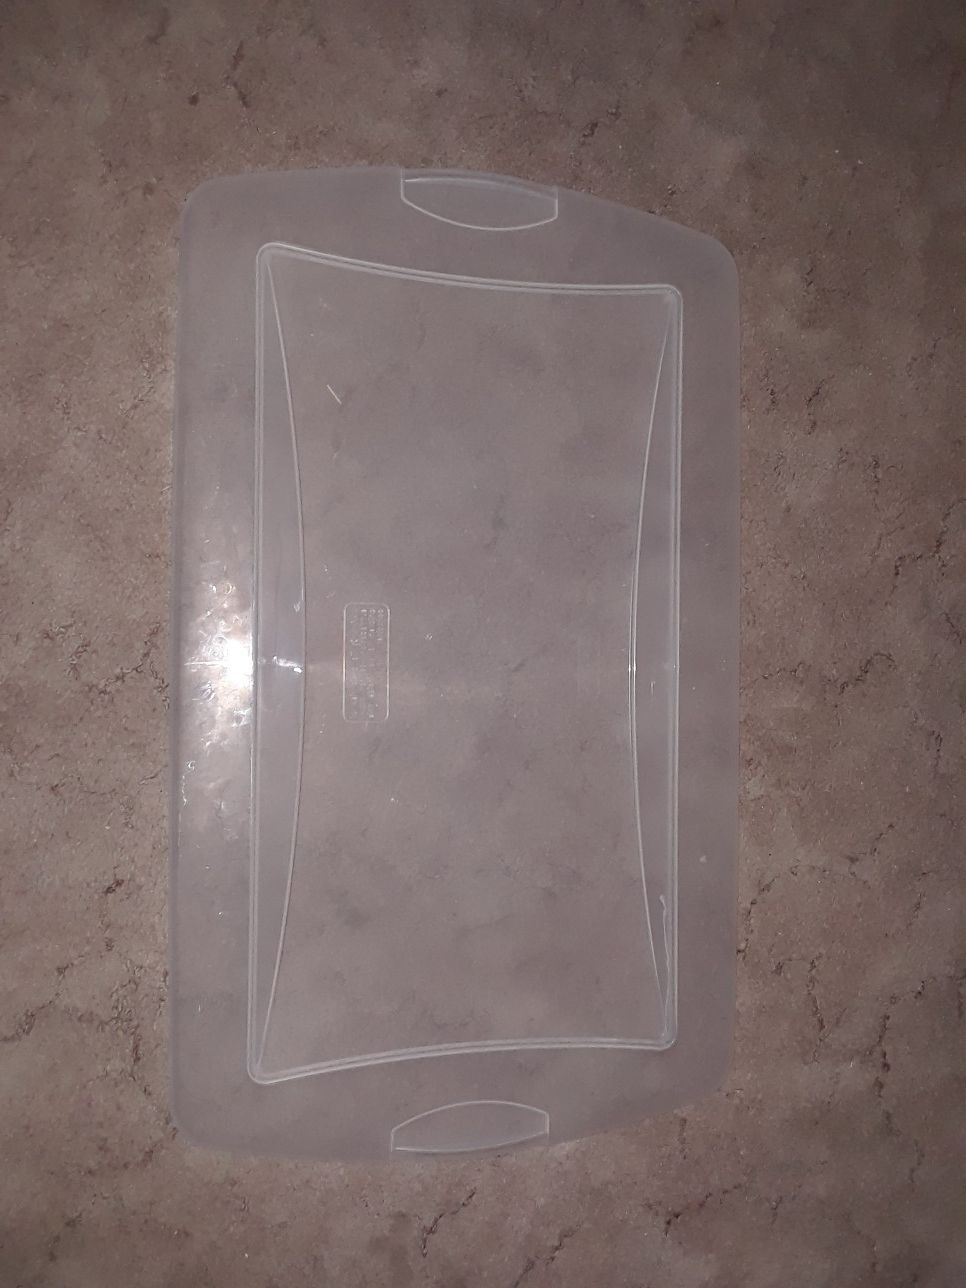 FREE: LID ONLY for Sterilite storage box tub CRACKED